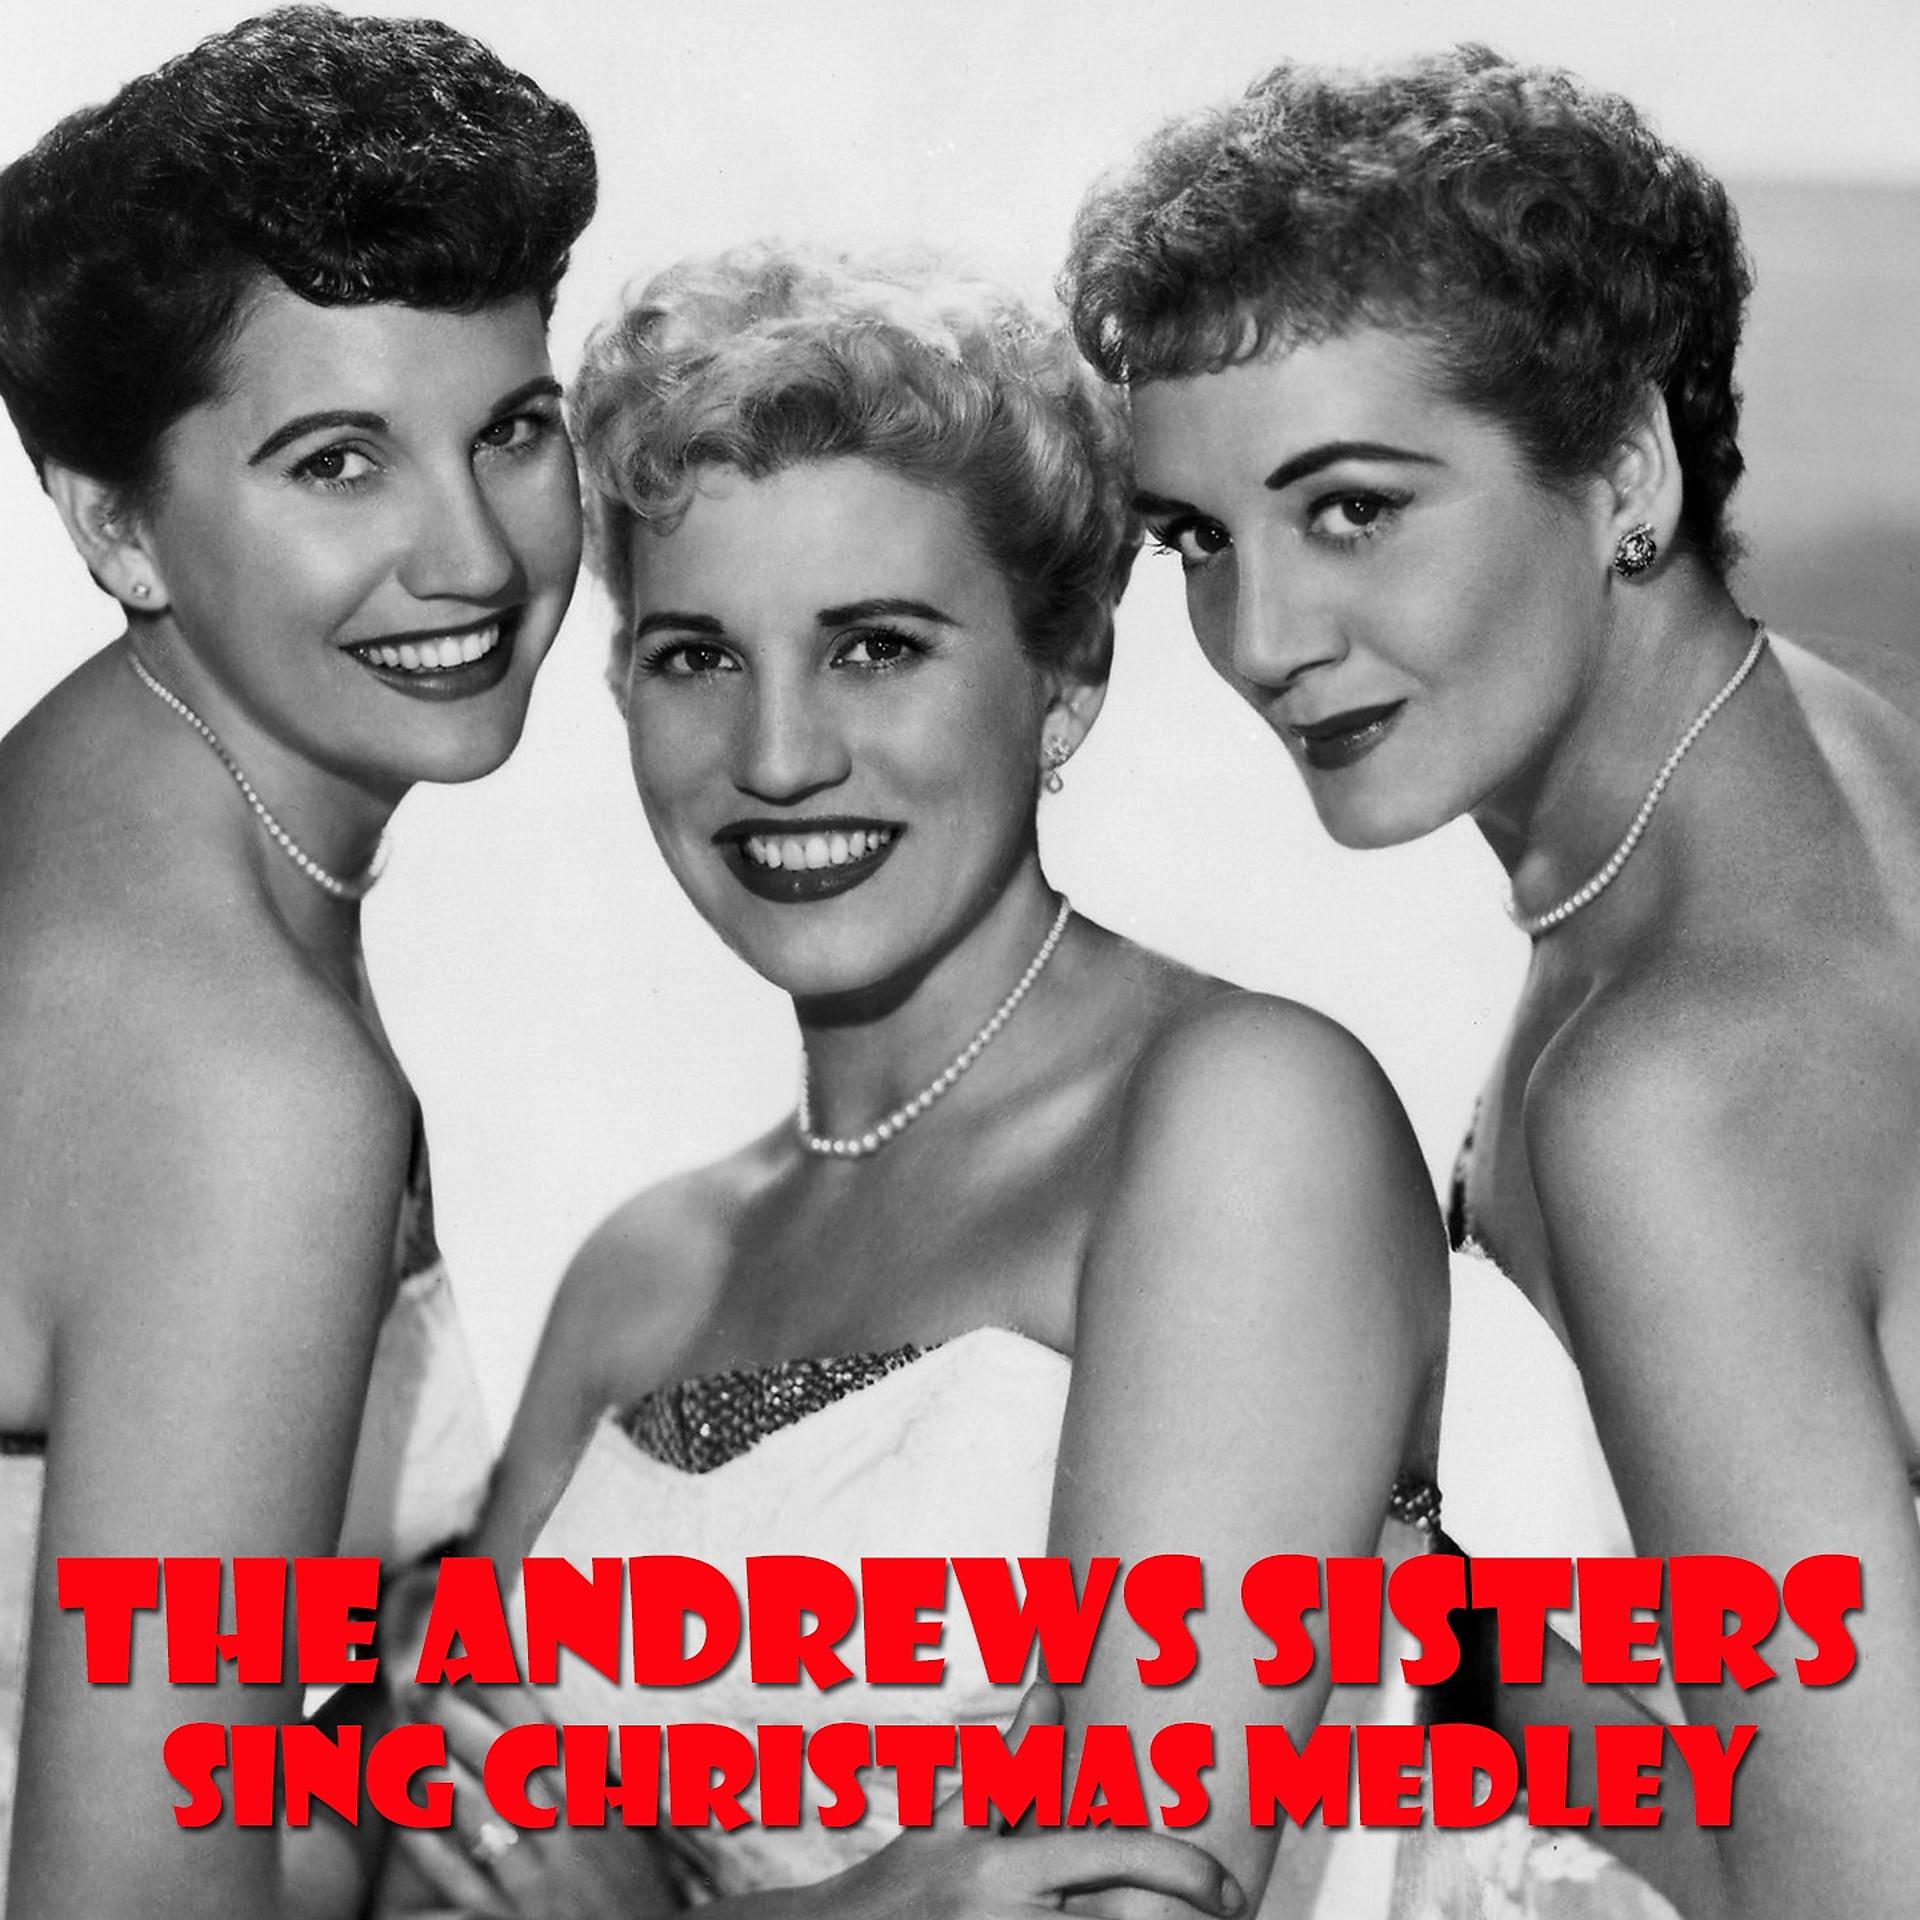 Постер альбома The Andrews Sisters Sing Christmas Medley: Jing a Ling Jing a Ling / Jingle Bells / The Christmas Tree Angel / Santa Claus Is Coming to Town / Here Comes Santa Claus / Poppa Santa Claus / The Twelve Days of Christmas / Winter Wonderland / Sleigh Ride / Me